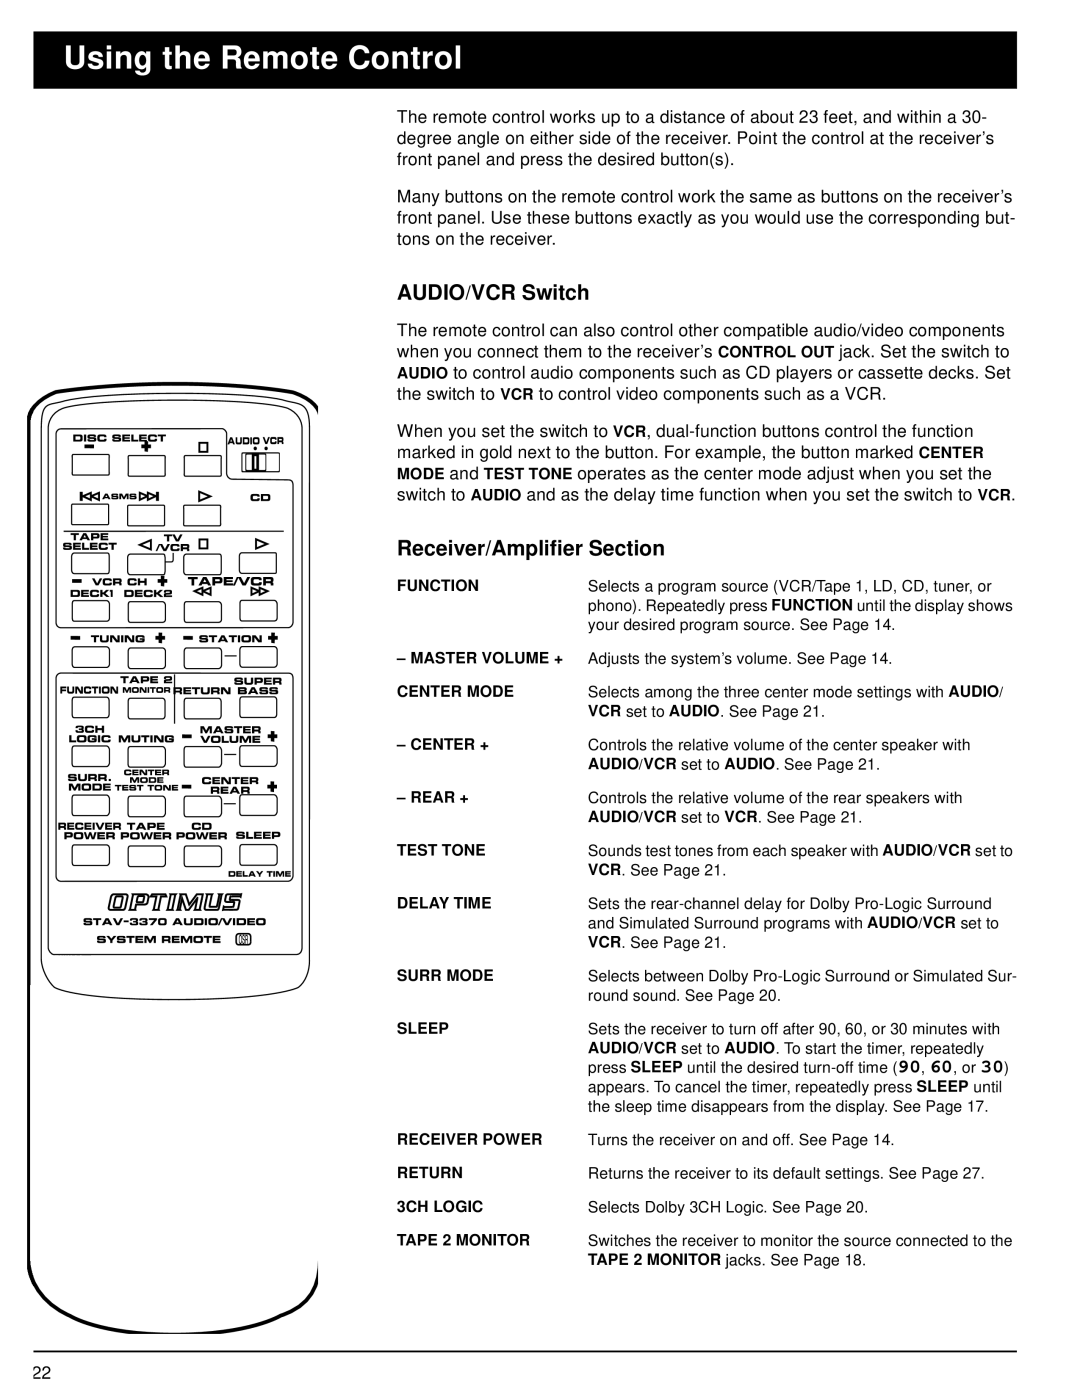 Optimus STAV-3370 owner manual Using the Remote Control, AUDIO/VCR Switch, Receiver/Amplifier Section 